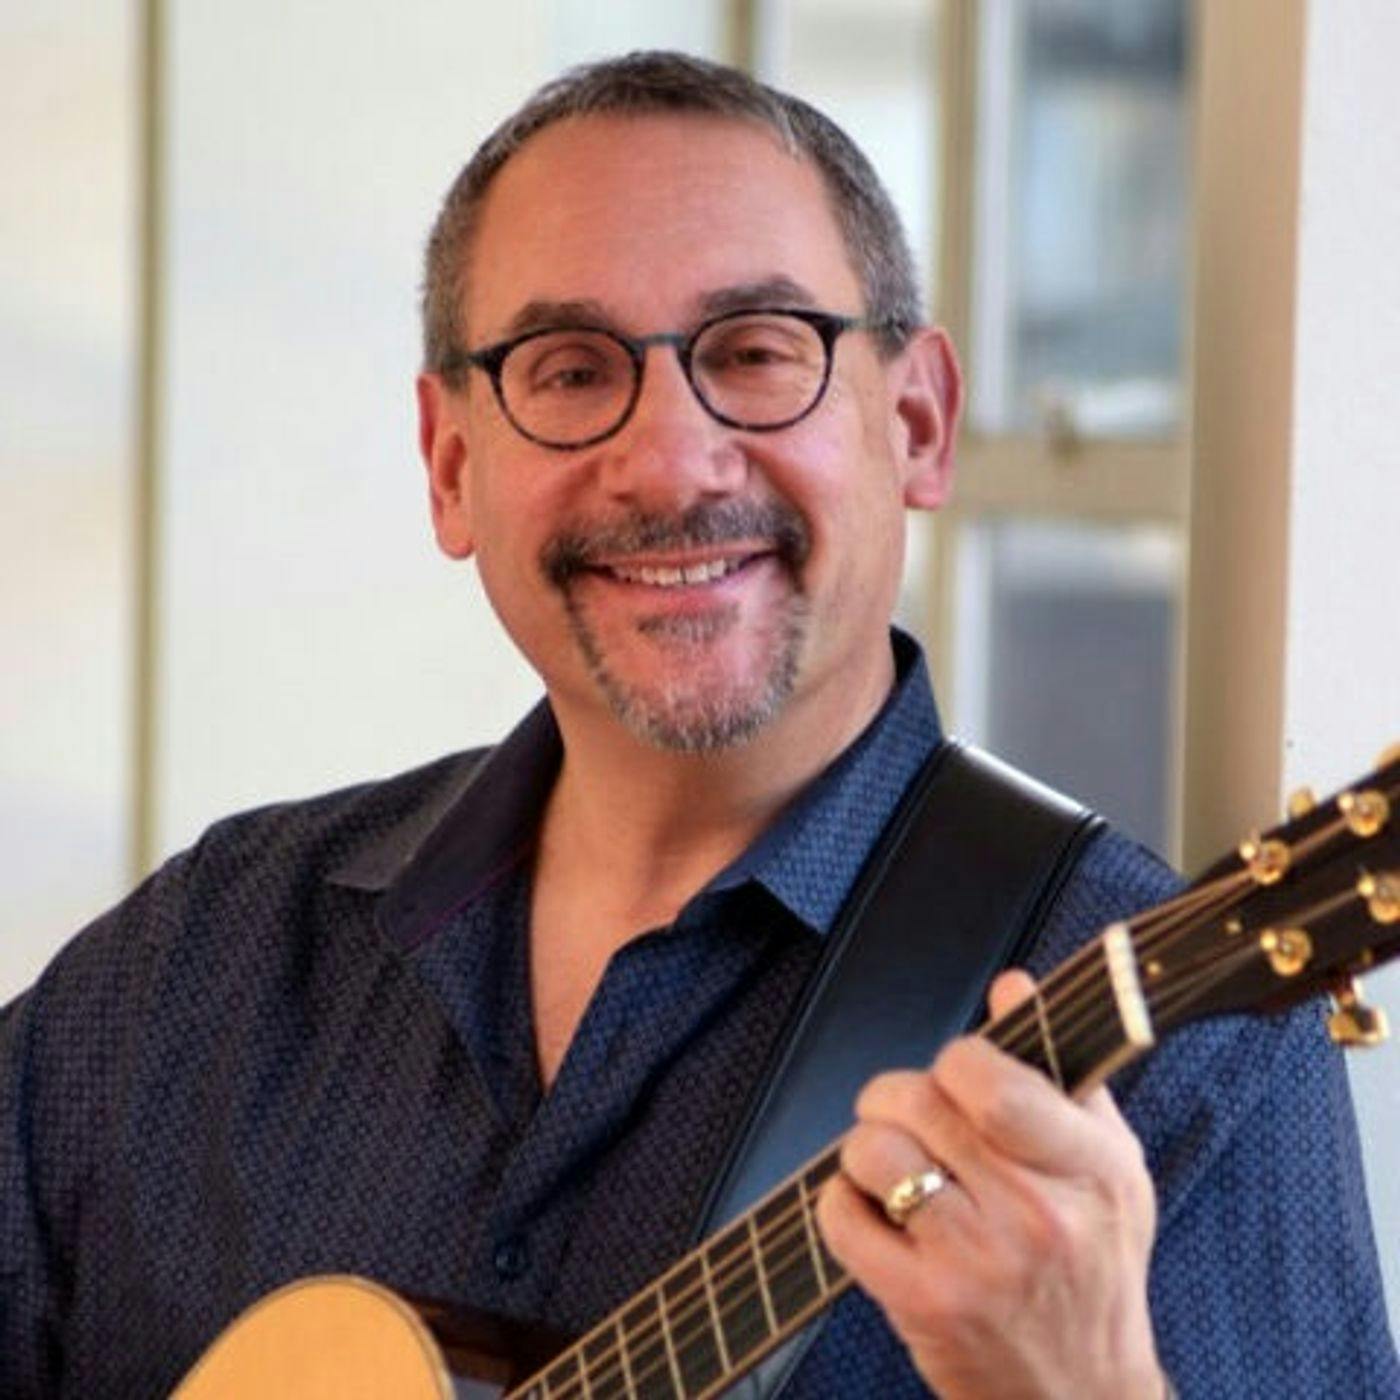 Rabbi Joe Black: Jewish Thoughts on Abortion, the Gift of Music, and the Messy Parts of Living